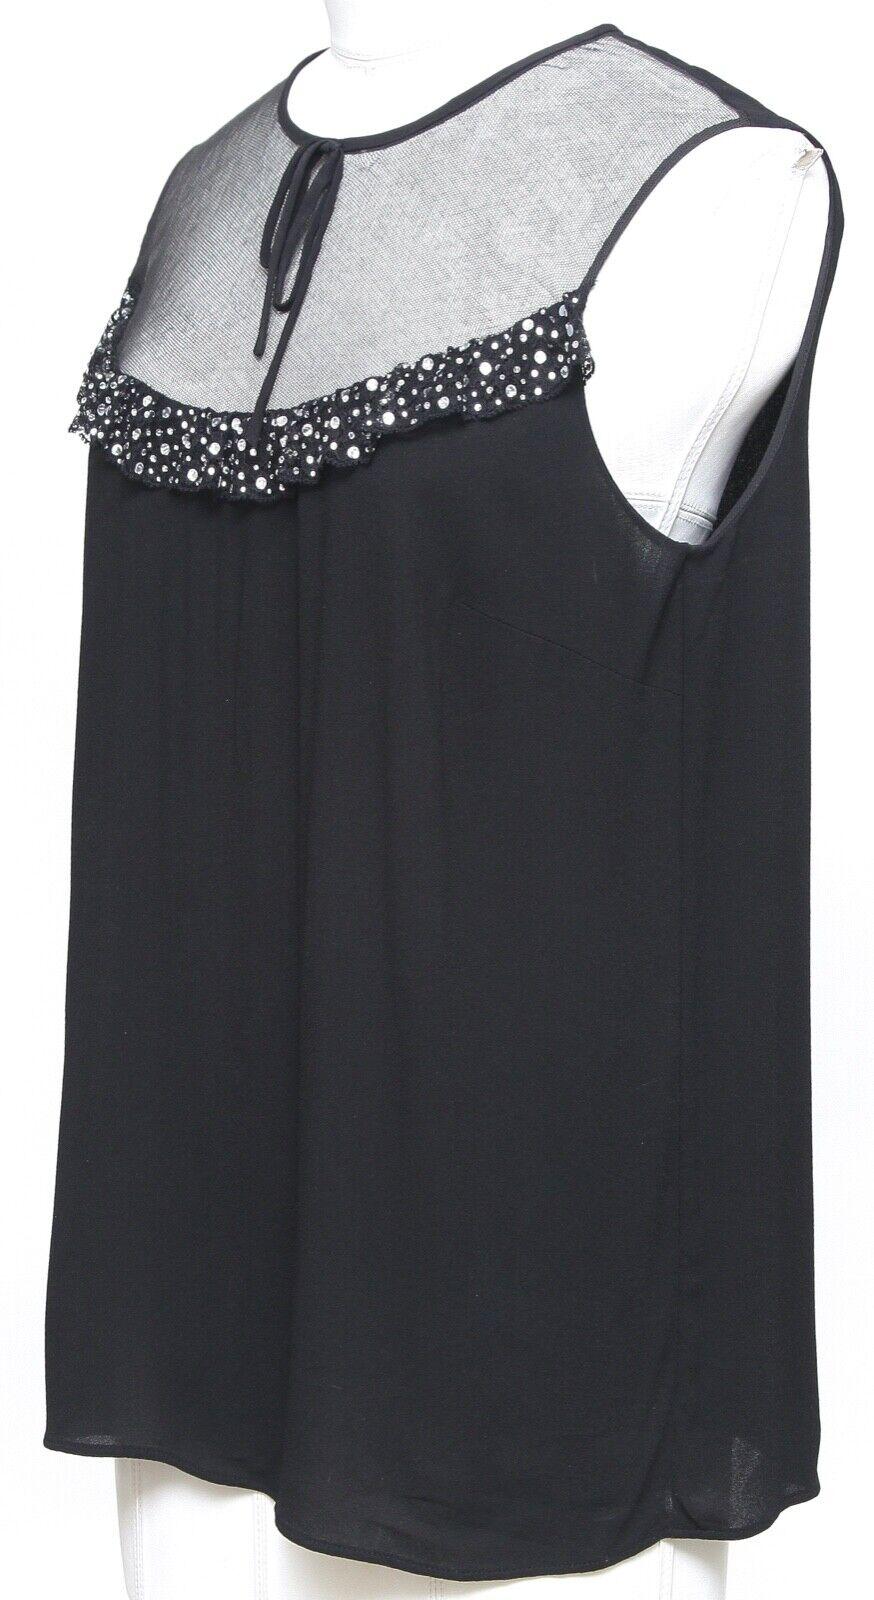 MIU MIU Top Blouse Shirt Sleeveless Black Viscose Tie Sequin Sz 42 NWT In New Condition For Sale In Hollywood, FL